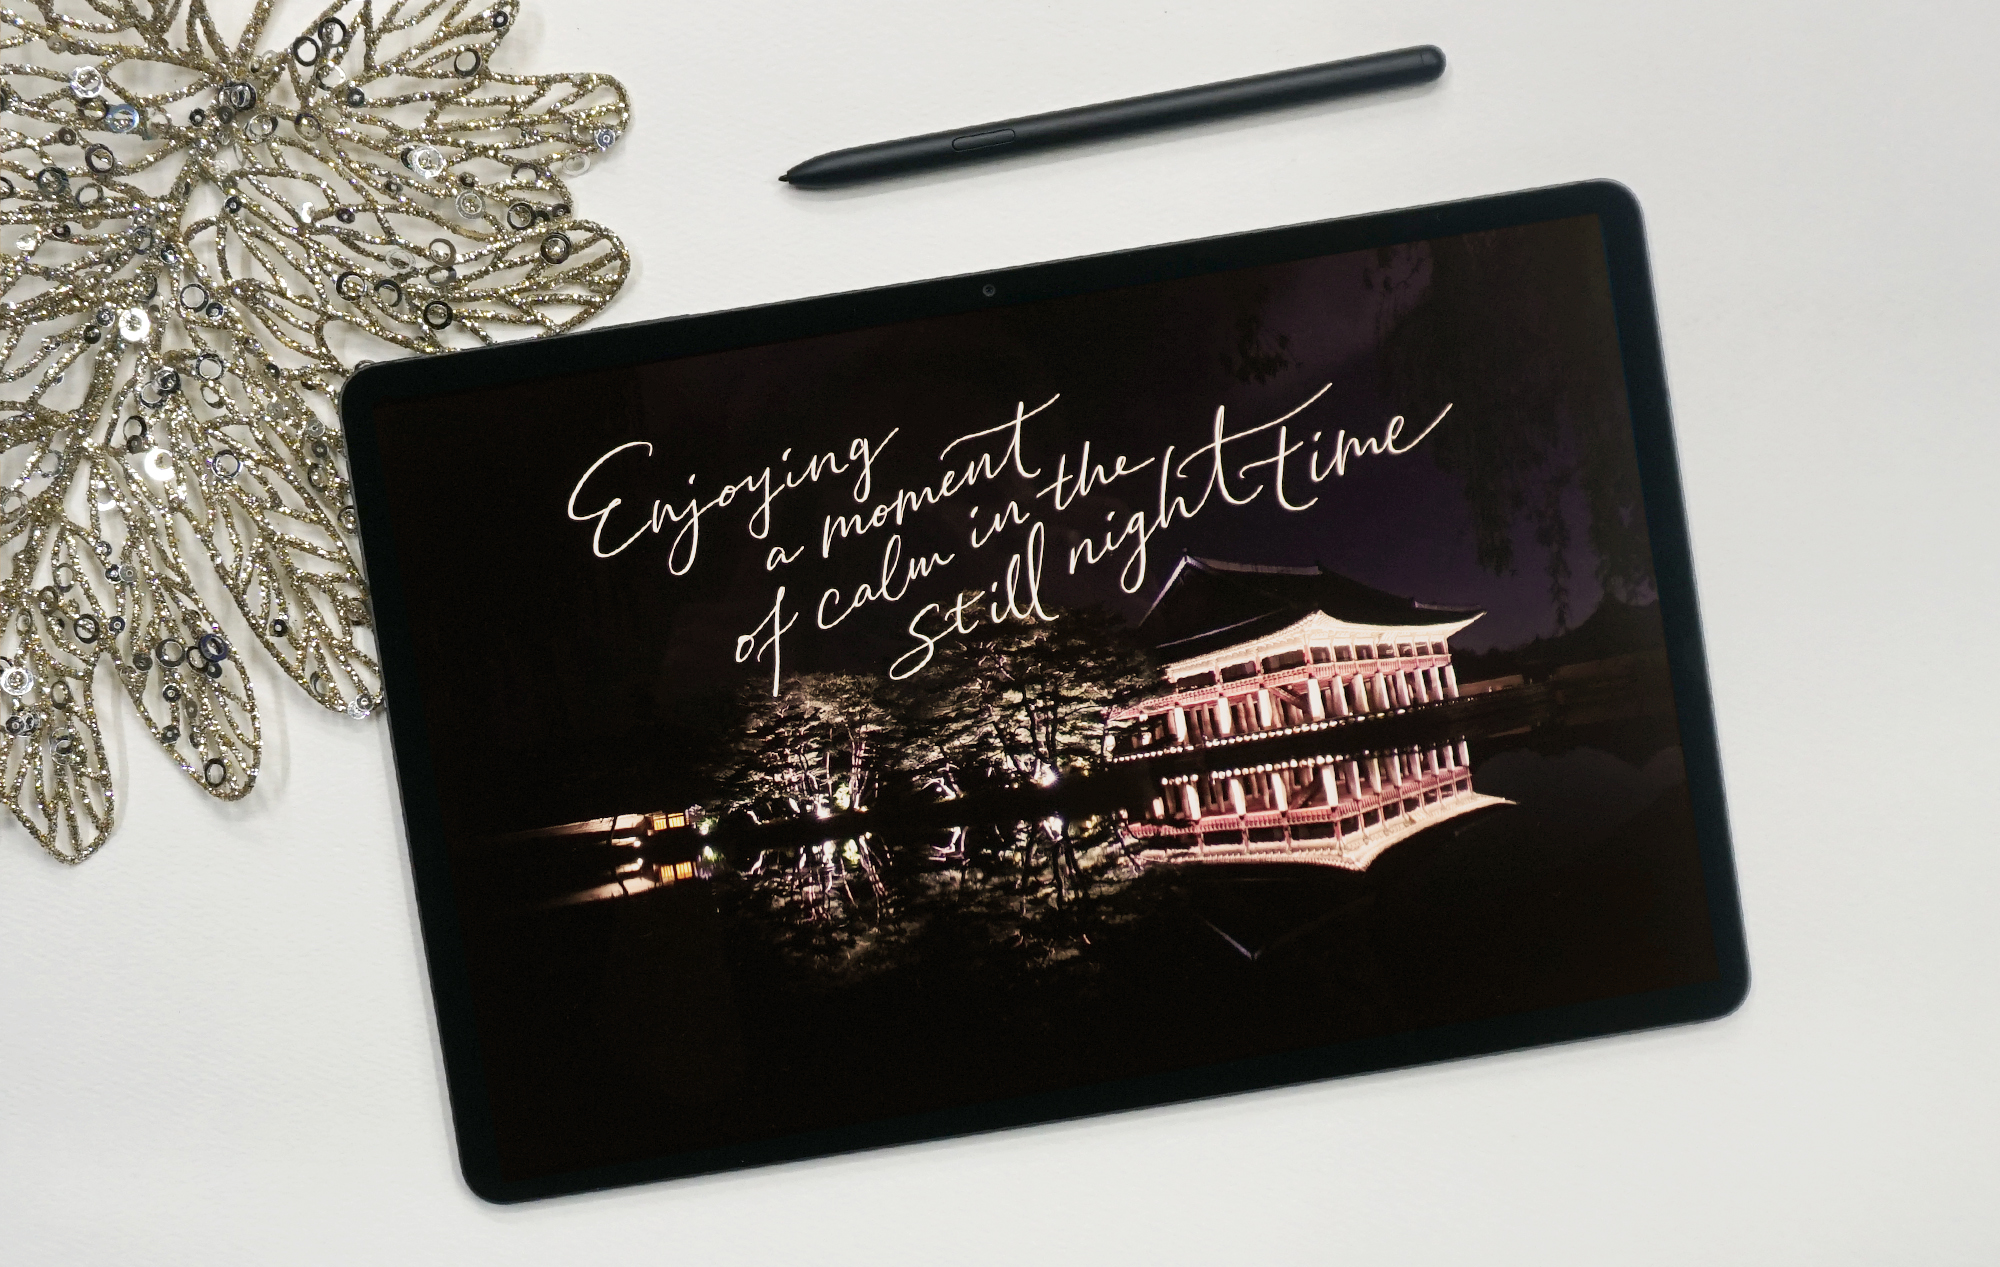 Calligraphy drawn on a photograph using the S Pen on Galaxy Tab S7+